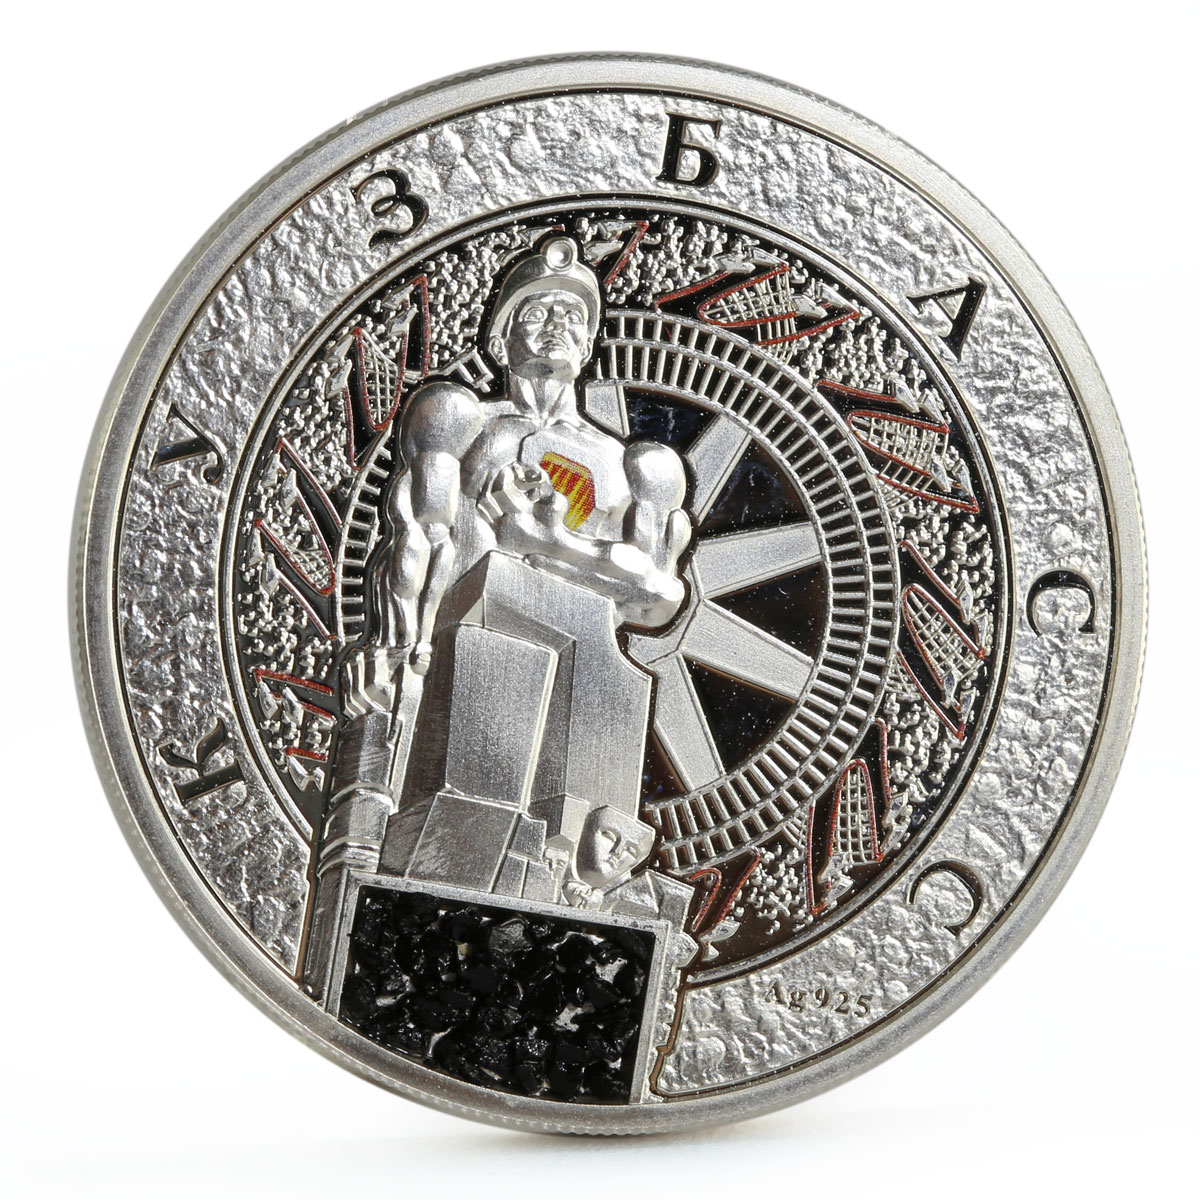 Niue 1 dollar Kuzbas Coal Mines series Statue of a Worker proof silver coin 2012